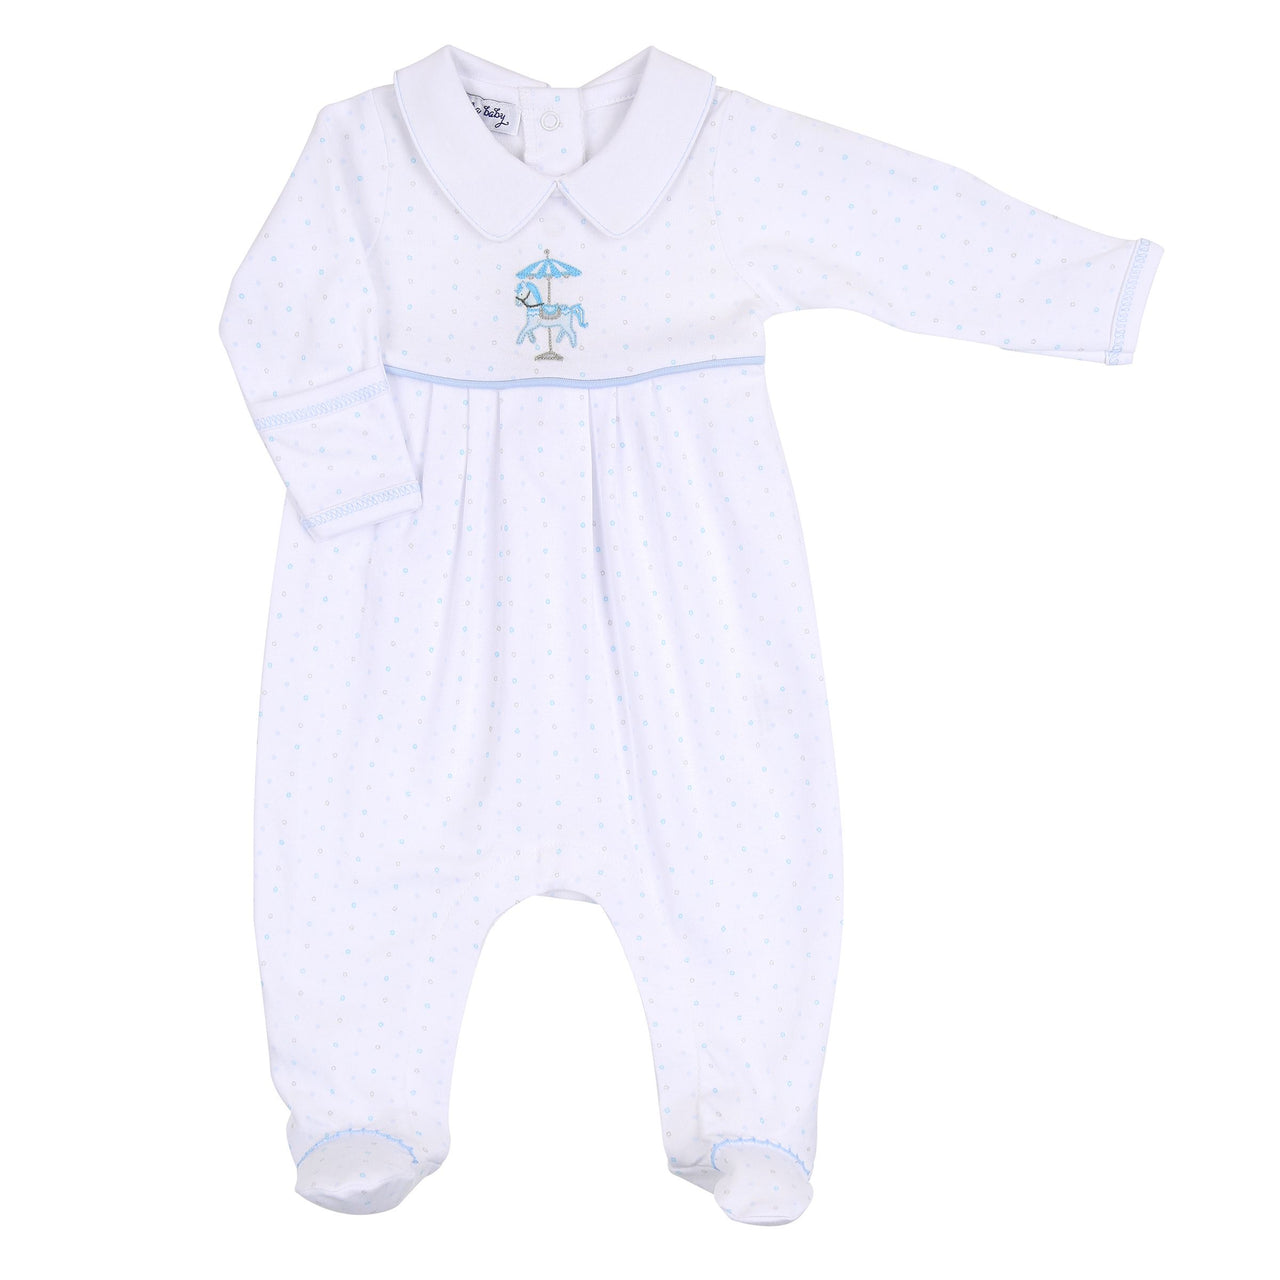 Magnolia Baby Carousel Emb Collared Footie Light Blue 5005